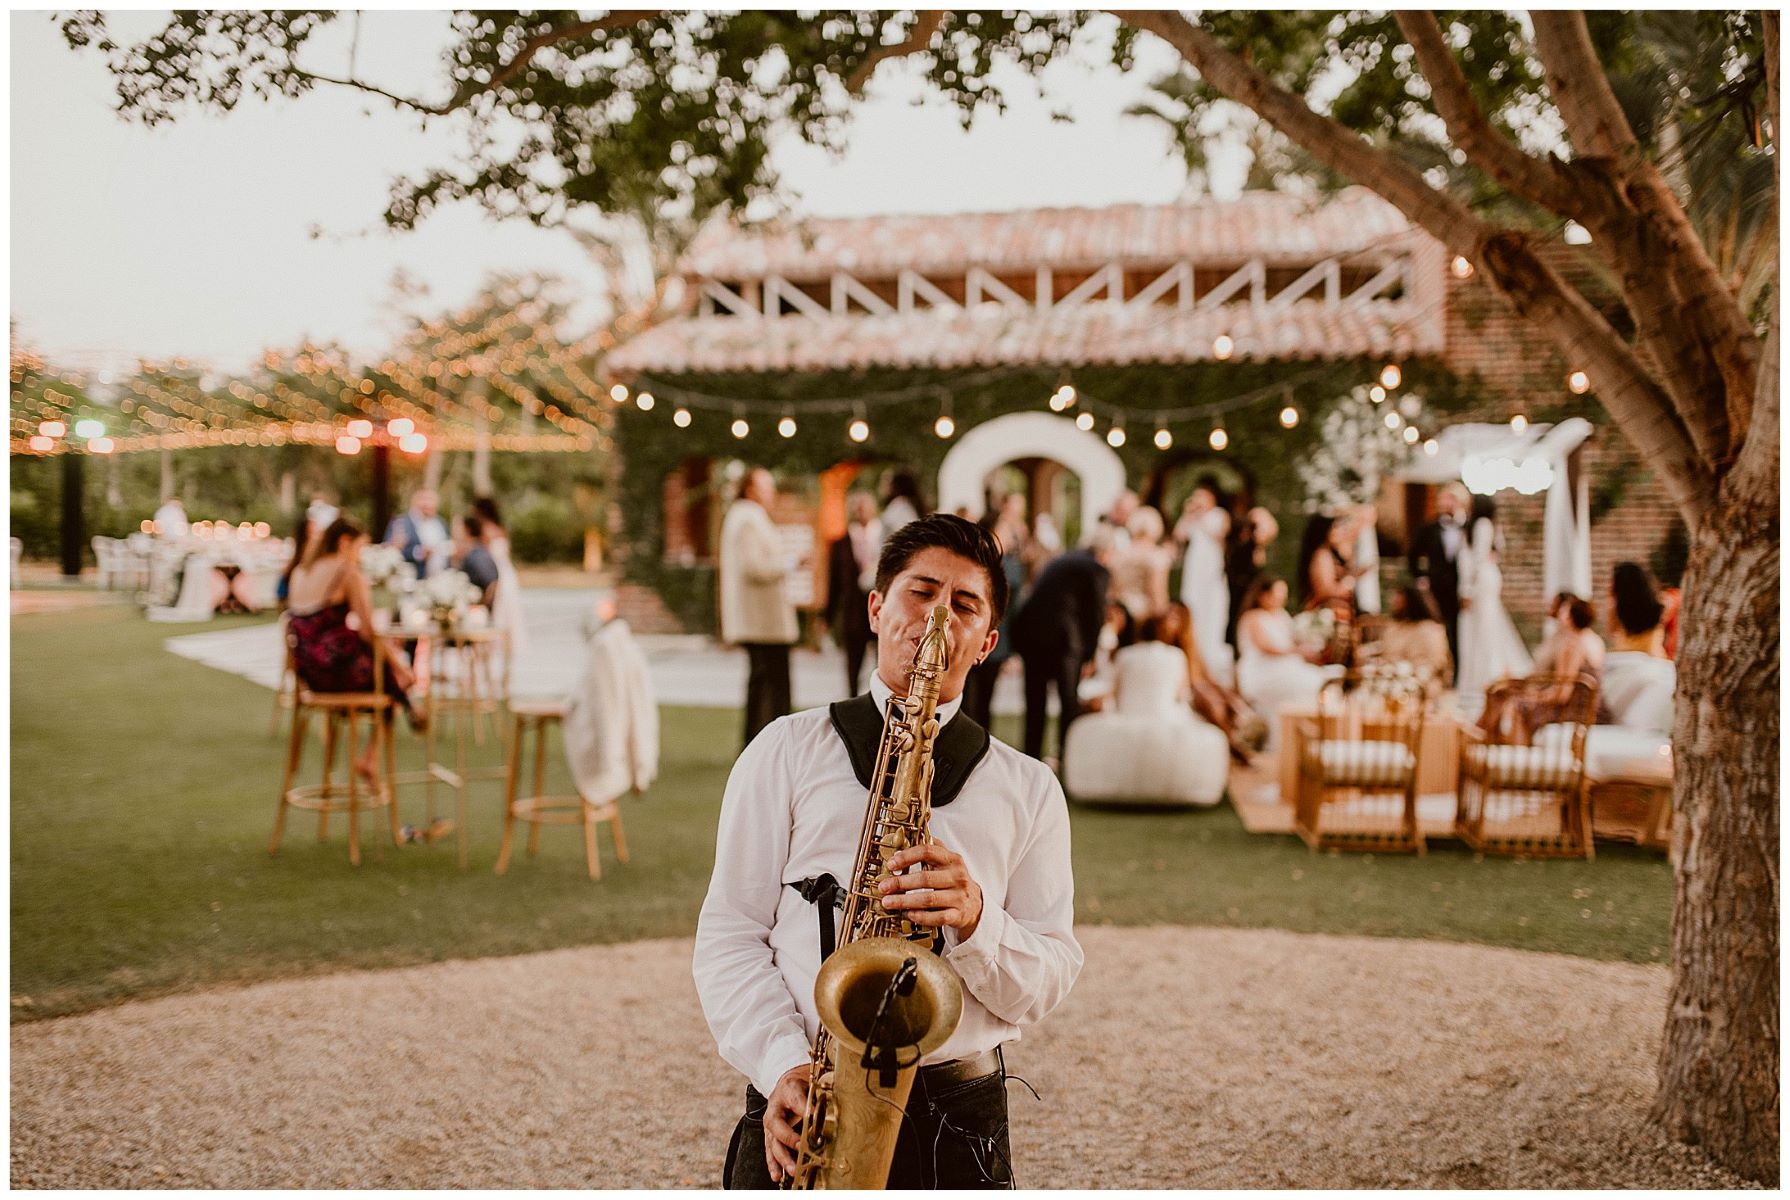 How To Be A Wedding Musician